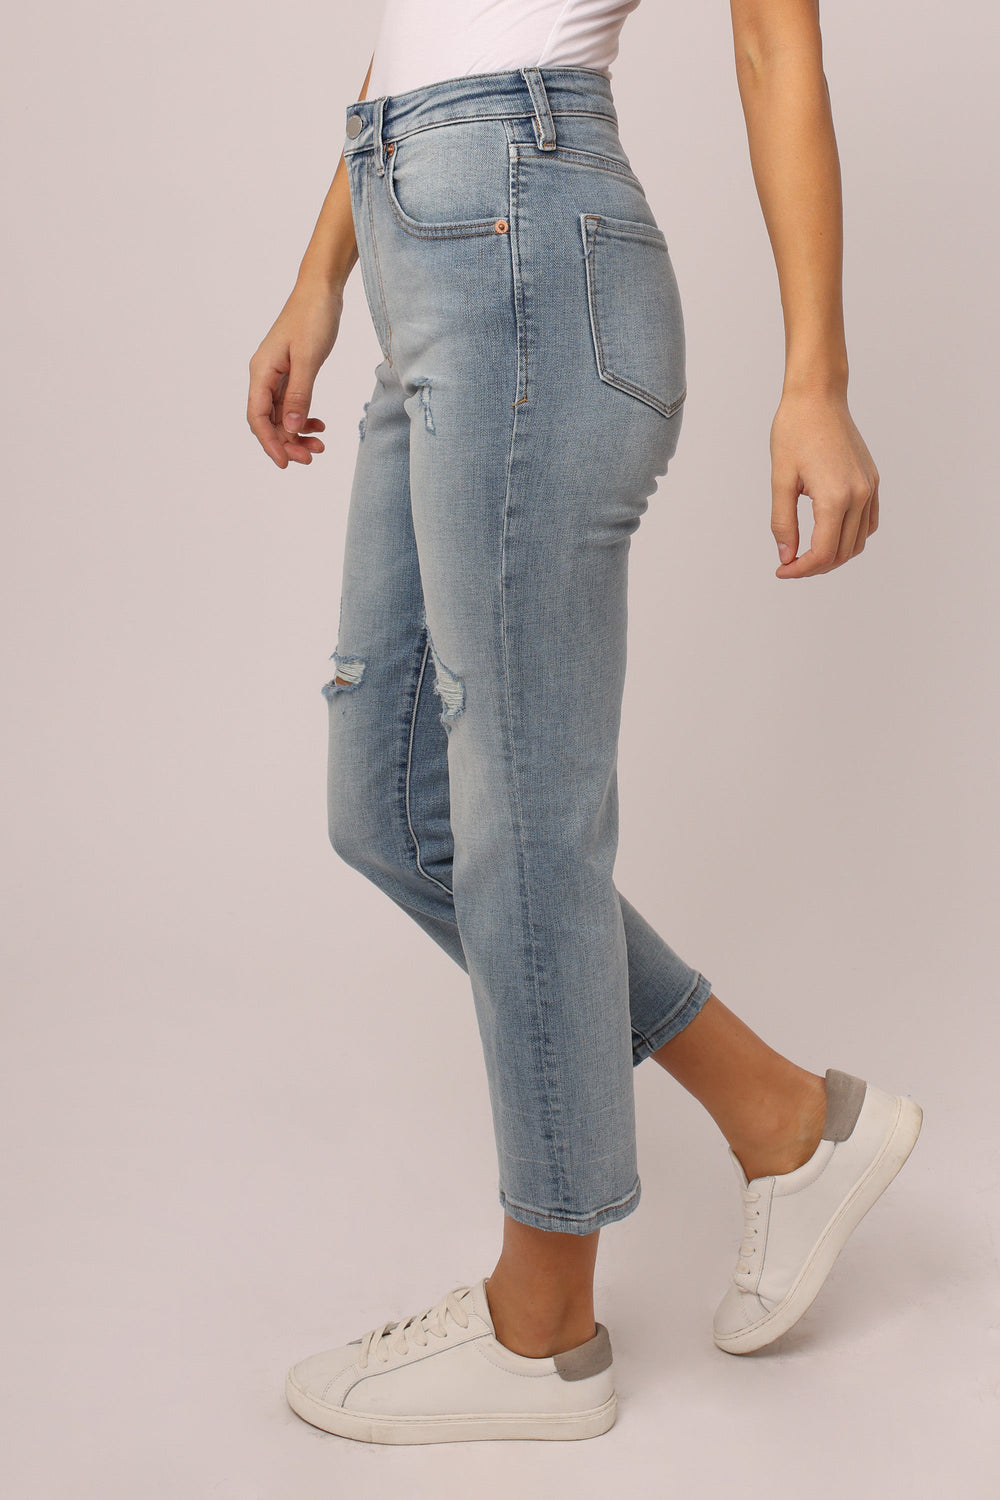 image of a female model wearing a FRANKIE SUPER HIGH RISE STRAIGHT JEANS HACIENDA JEANS